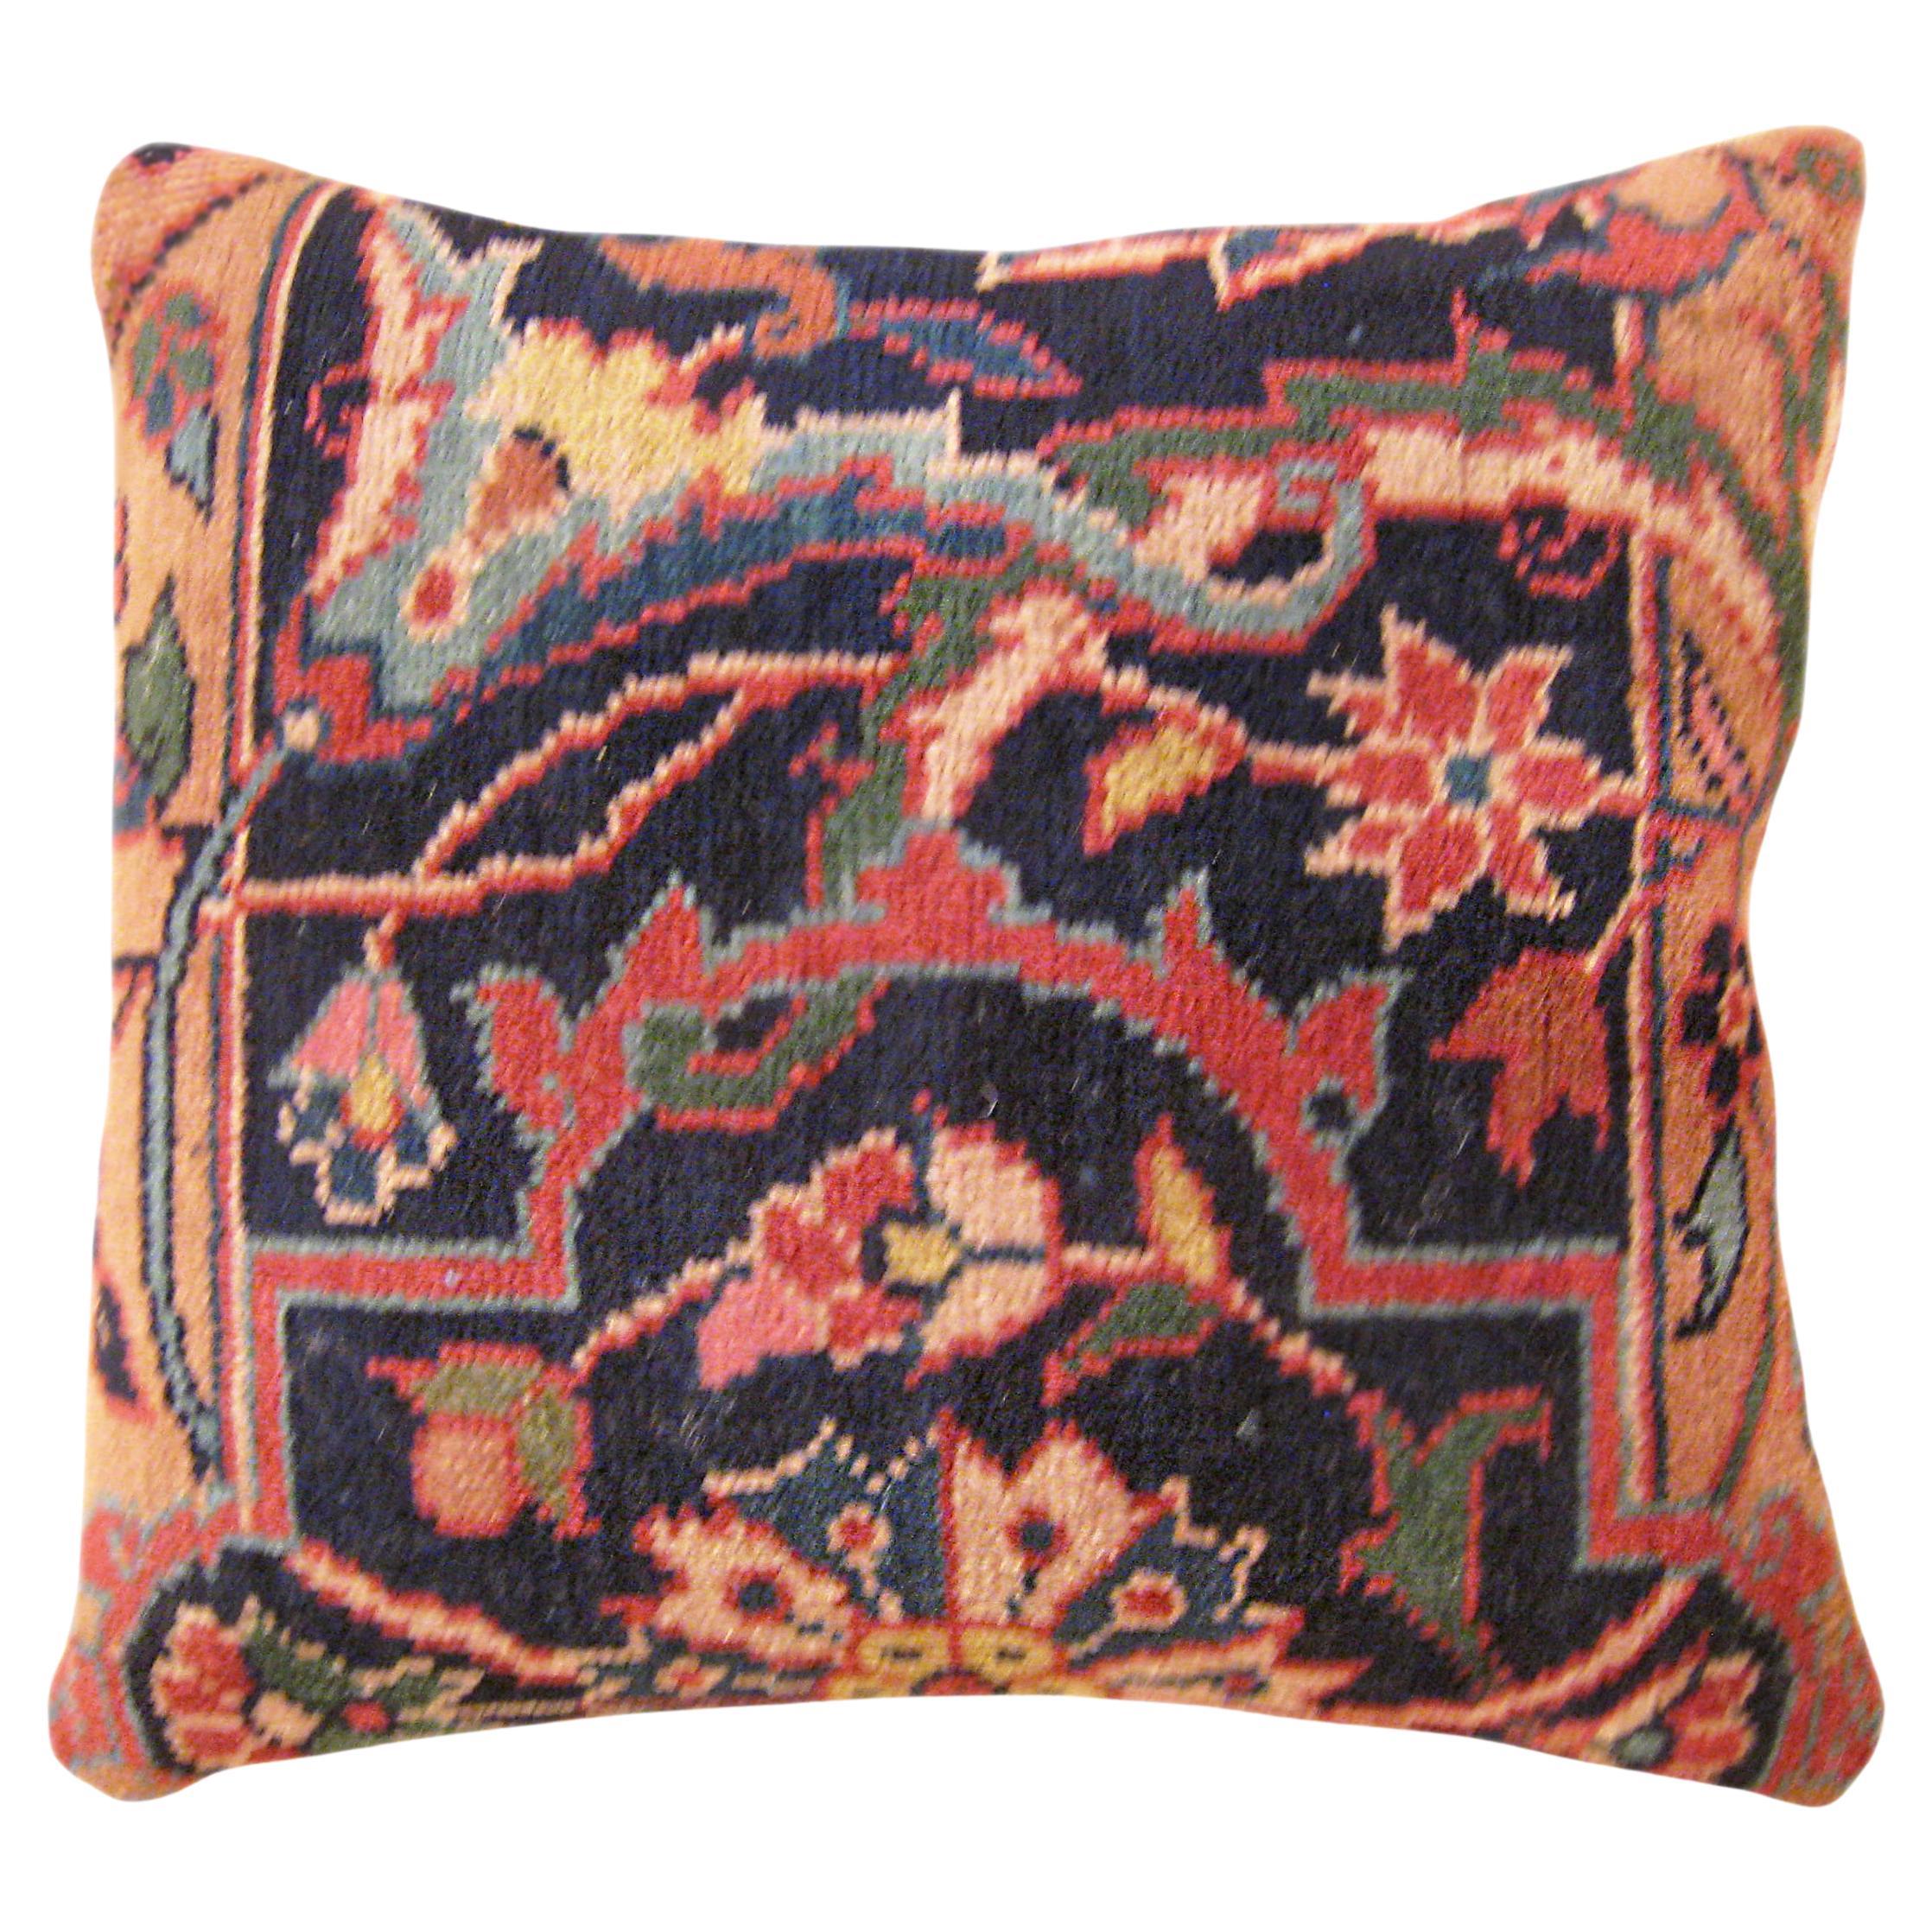 Decorative Antique Indian Agra Rug Pillow with Floral Elements